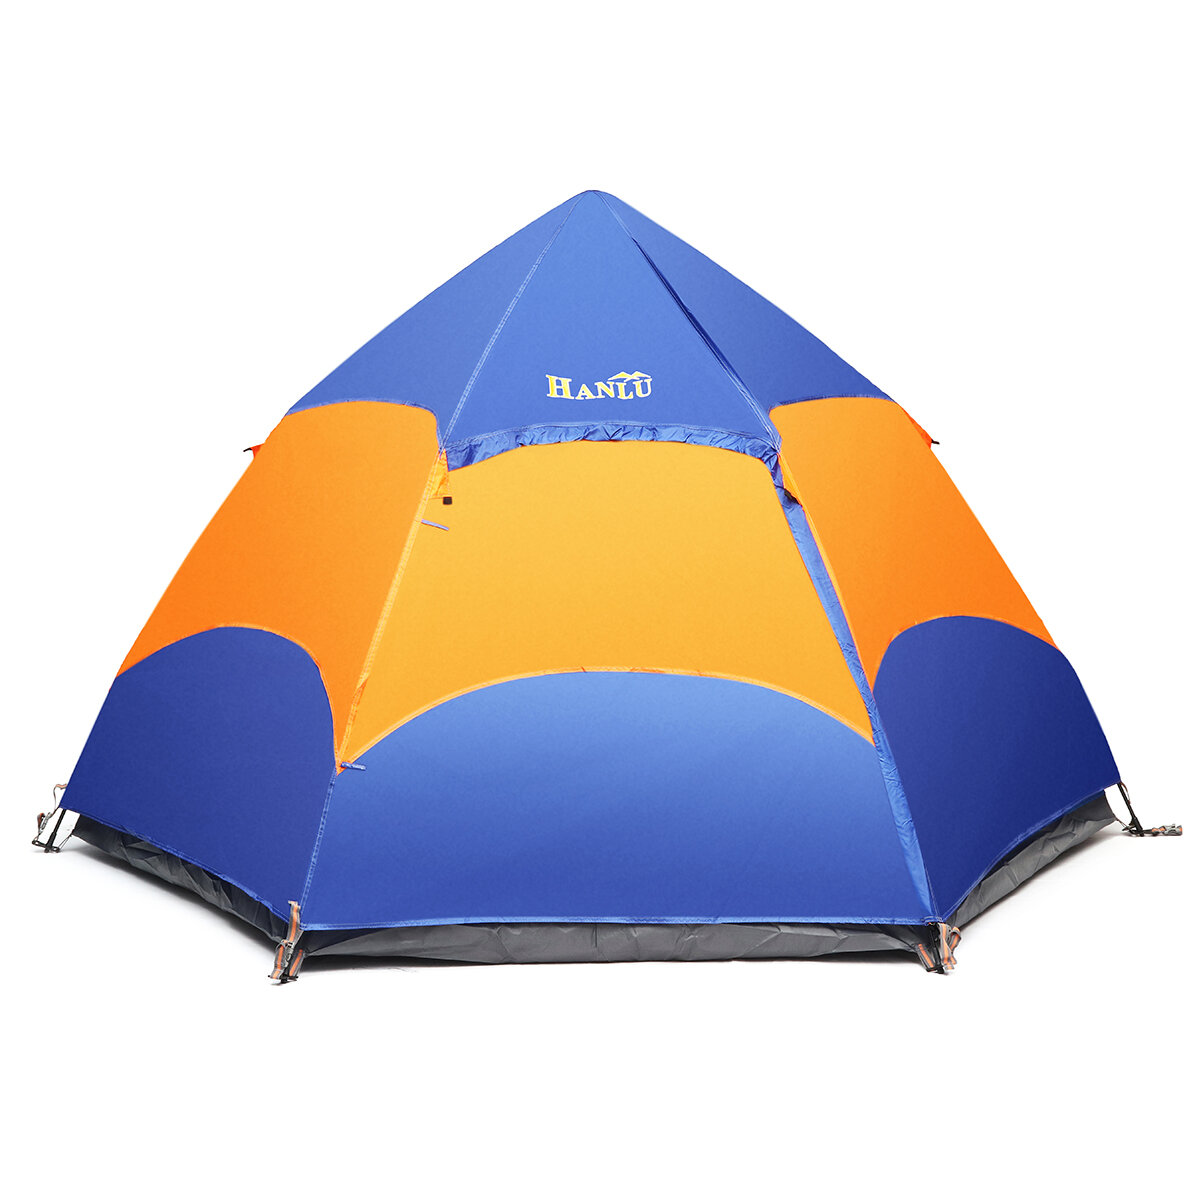 Outdoor Camping 5-6 People Automatic Instant Pop Up Tent Waterproof UV Proof Large Sunshade Canopy